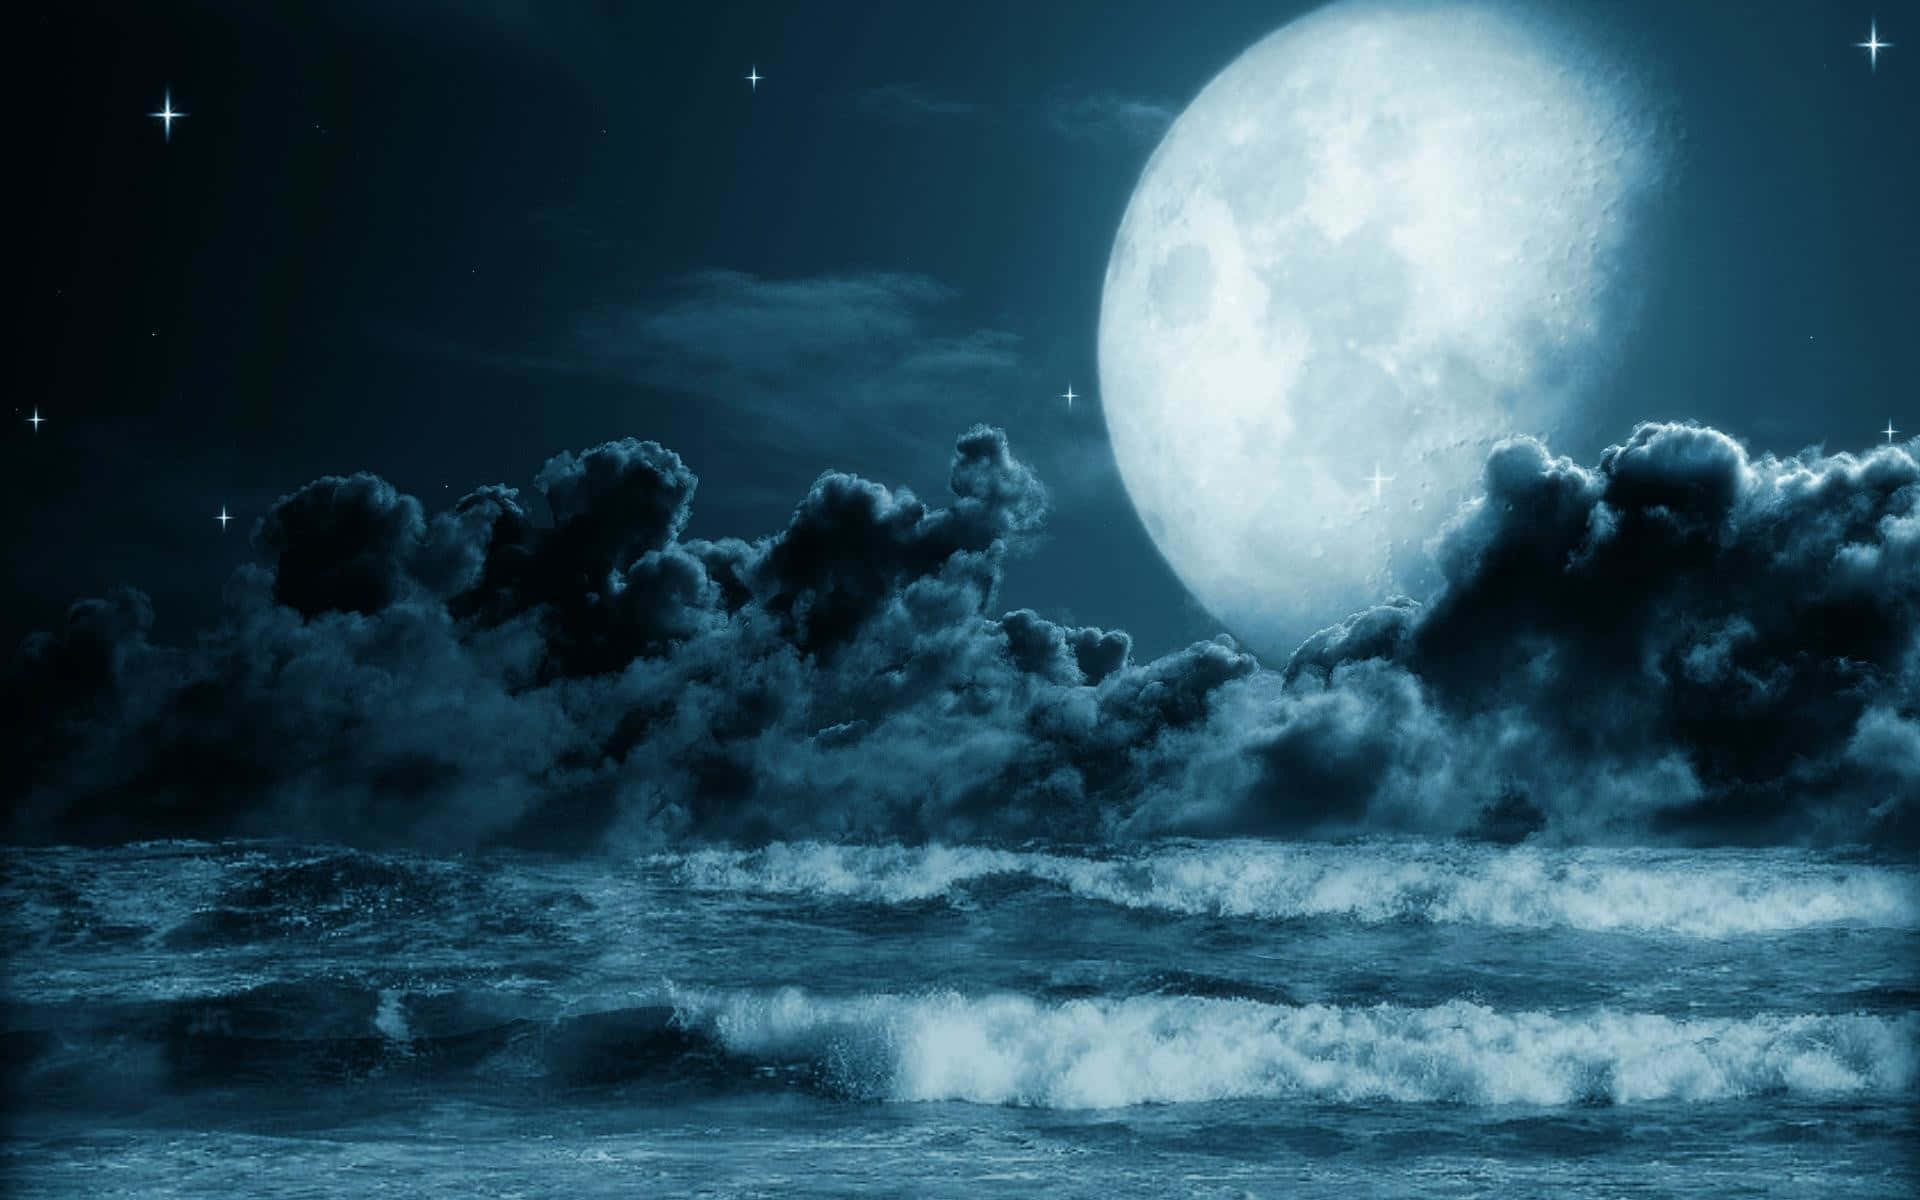 Take in the beauty of the gorgeous moonlit night sky. Wallpaper